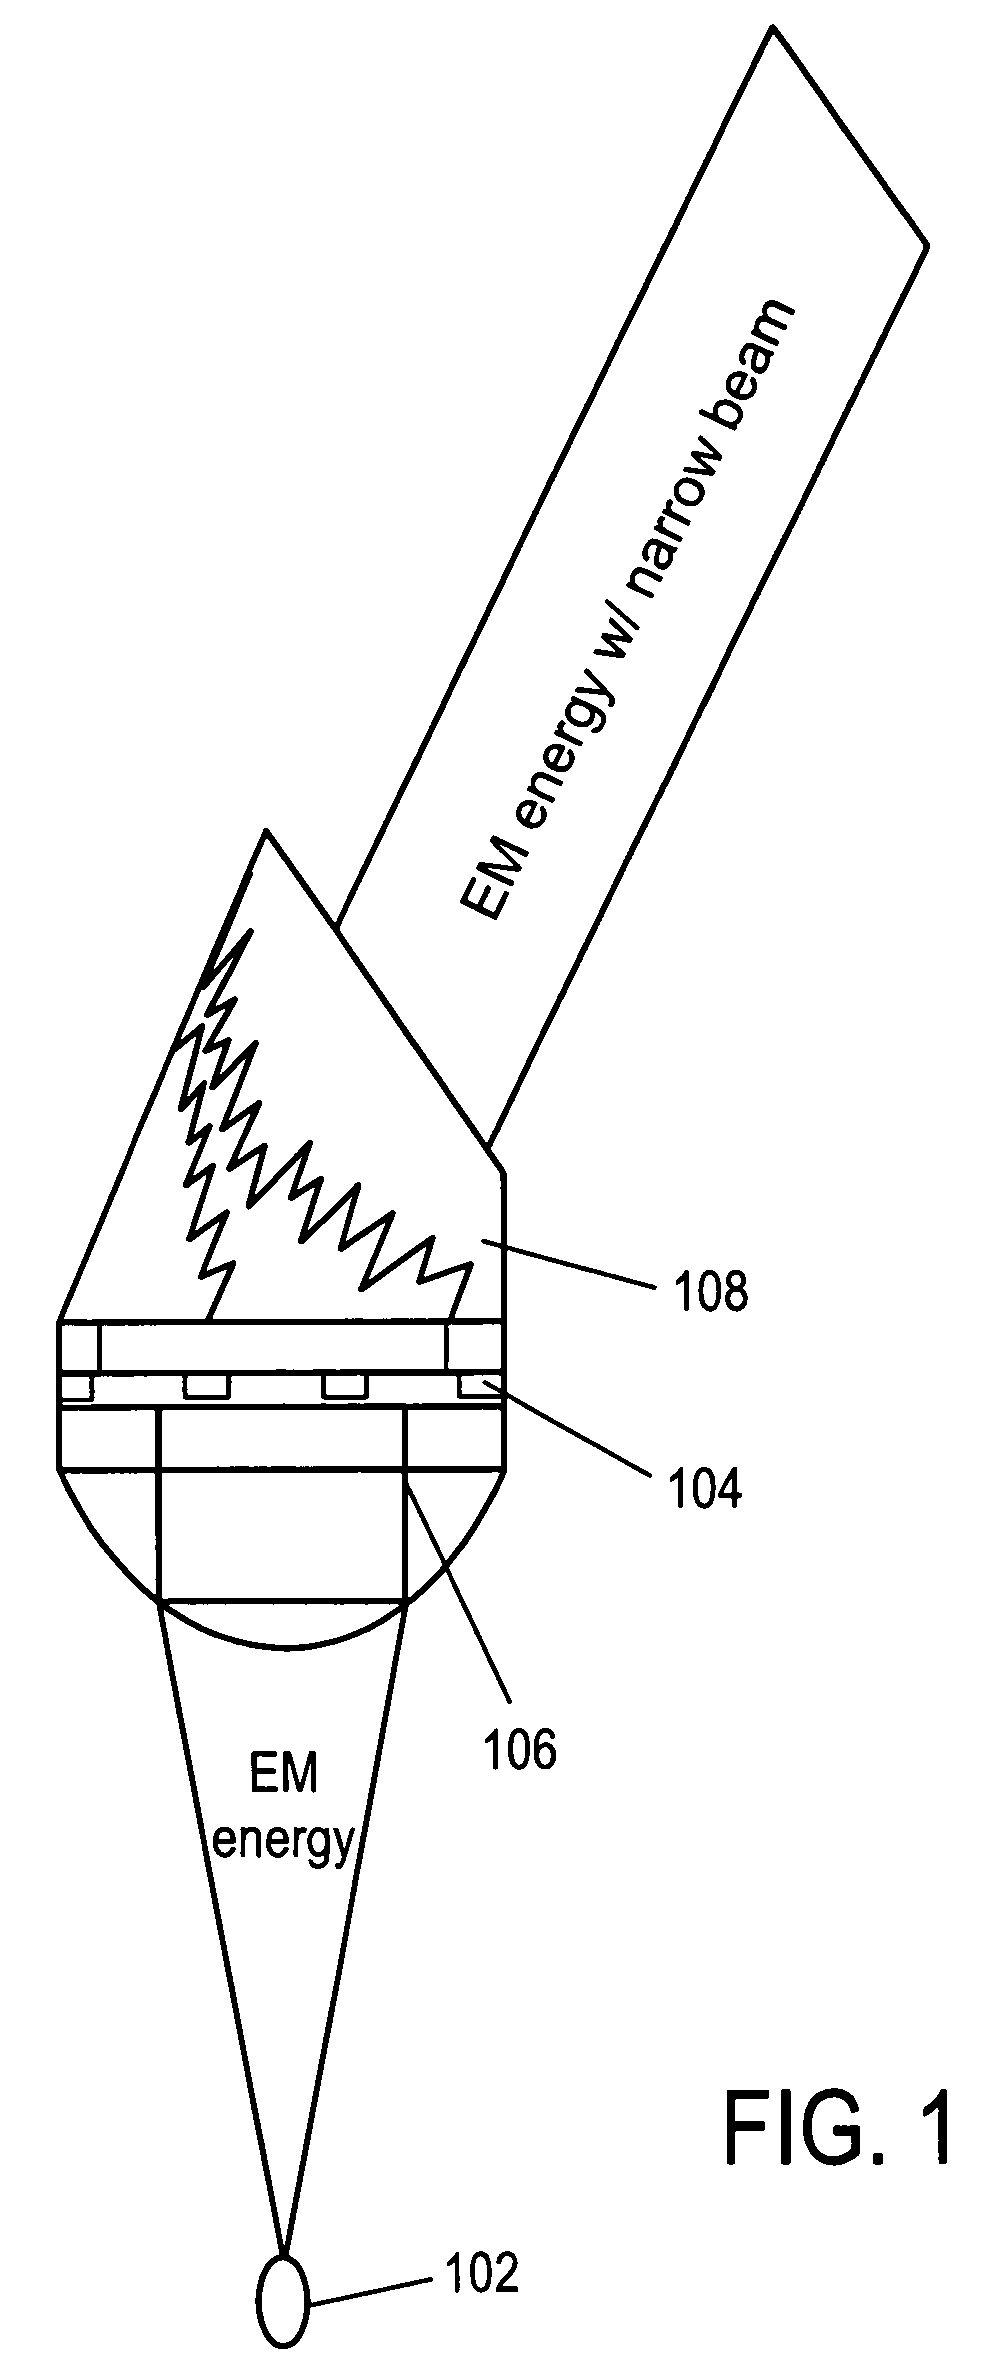 System, method and apparatus for RF directed energy